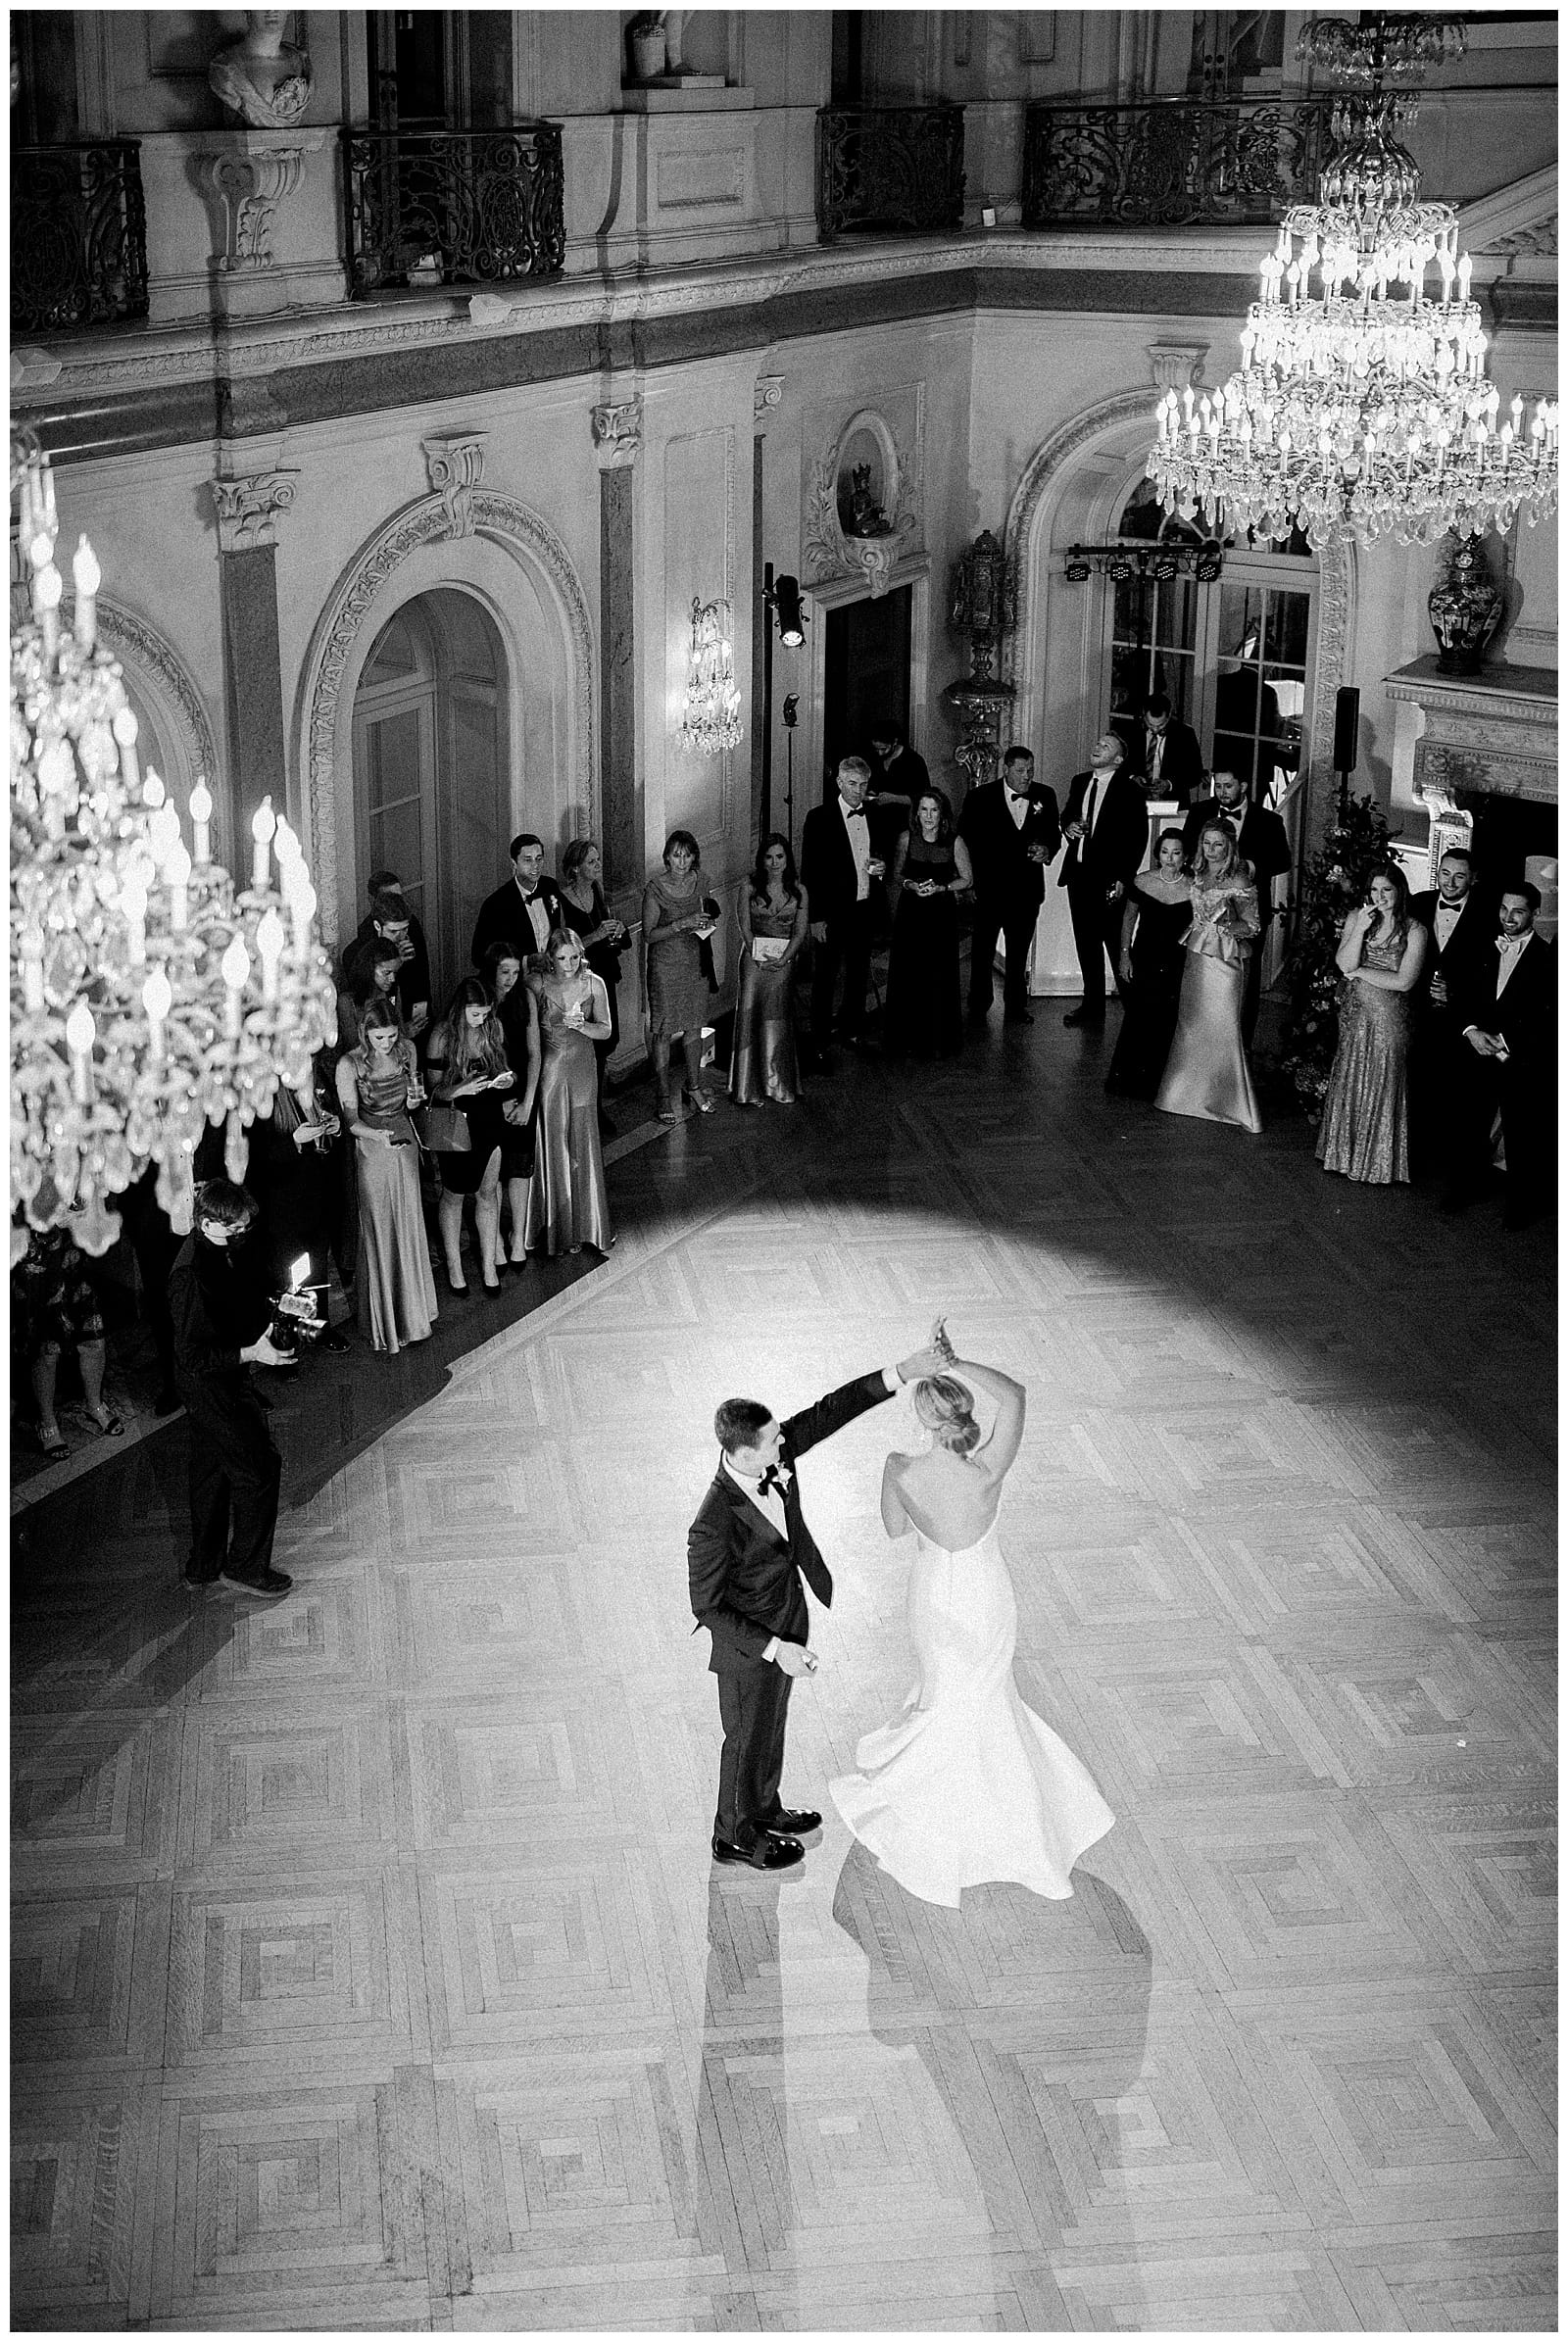 Image of bride and groom sharing their first dance inside the ballroom at the Anderson House in Washington DC